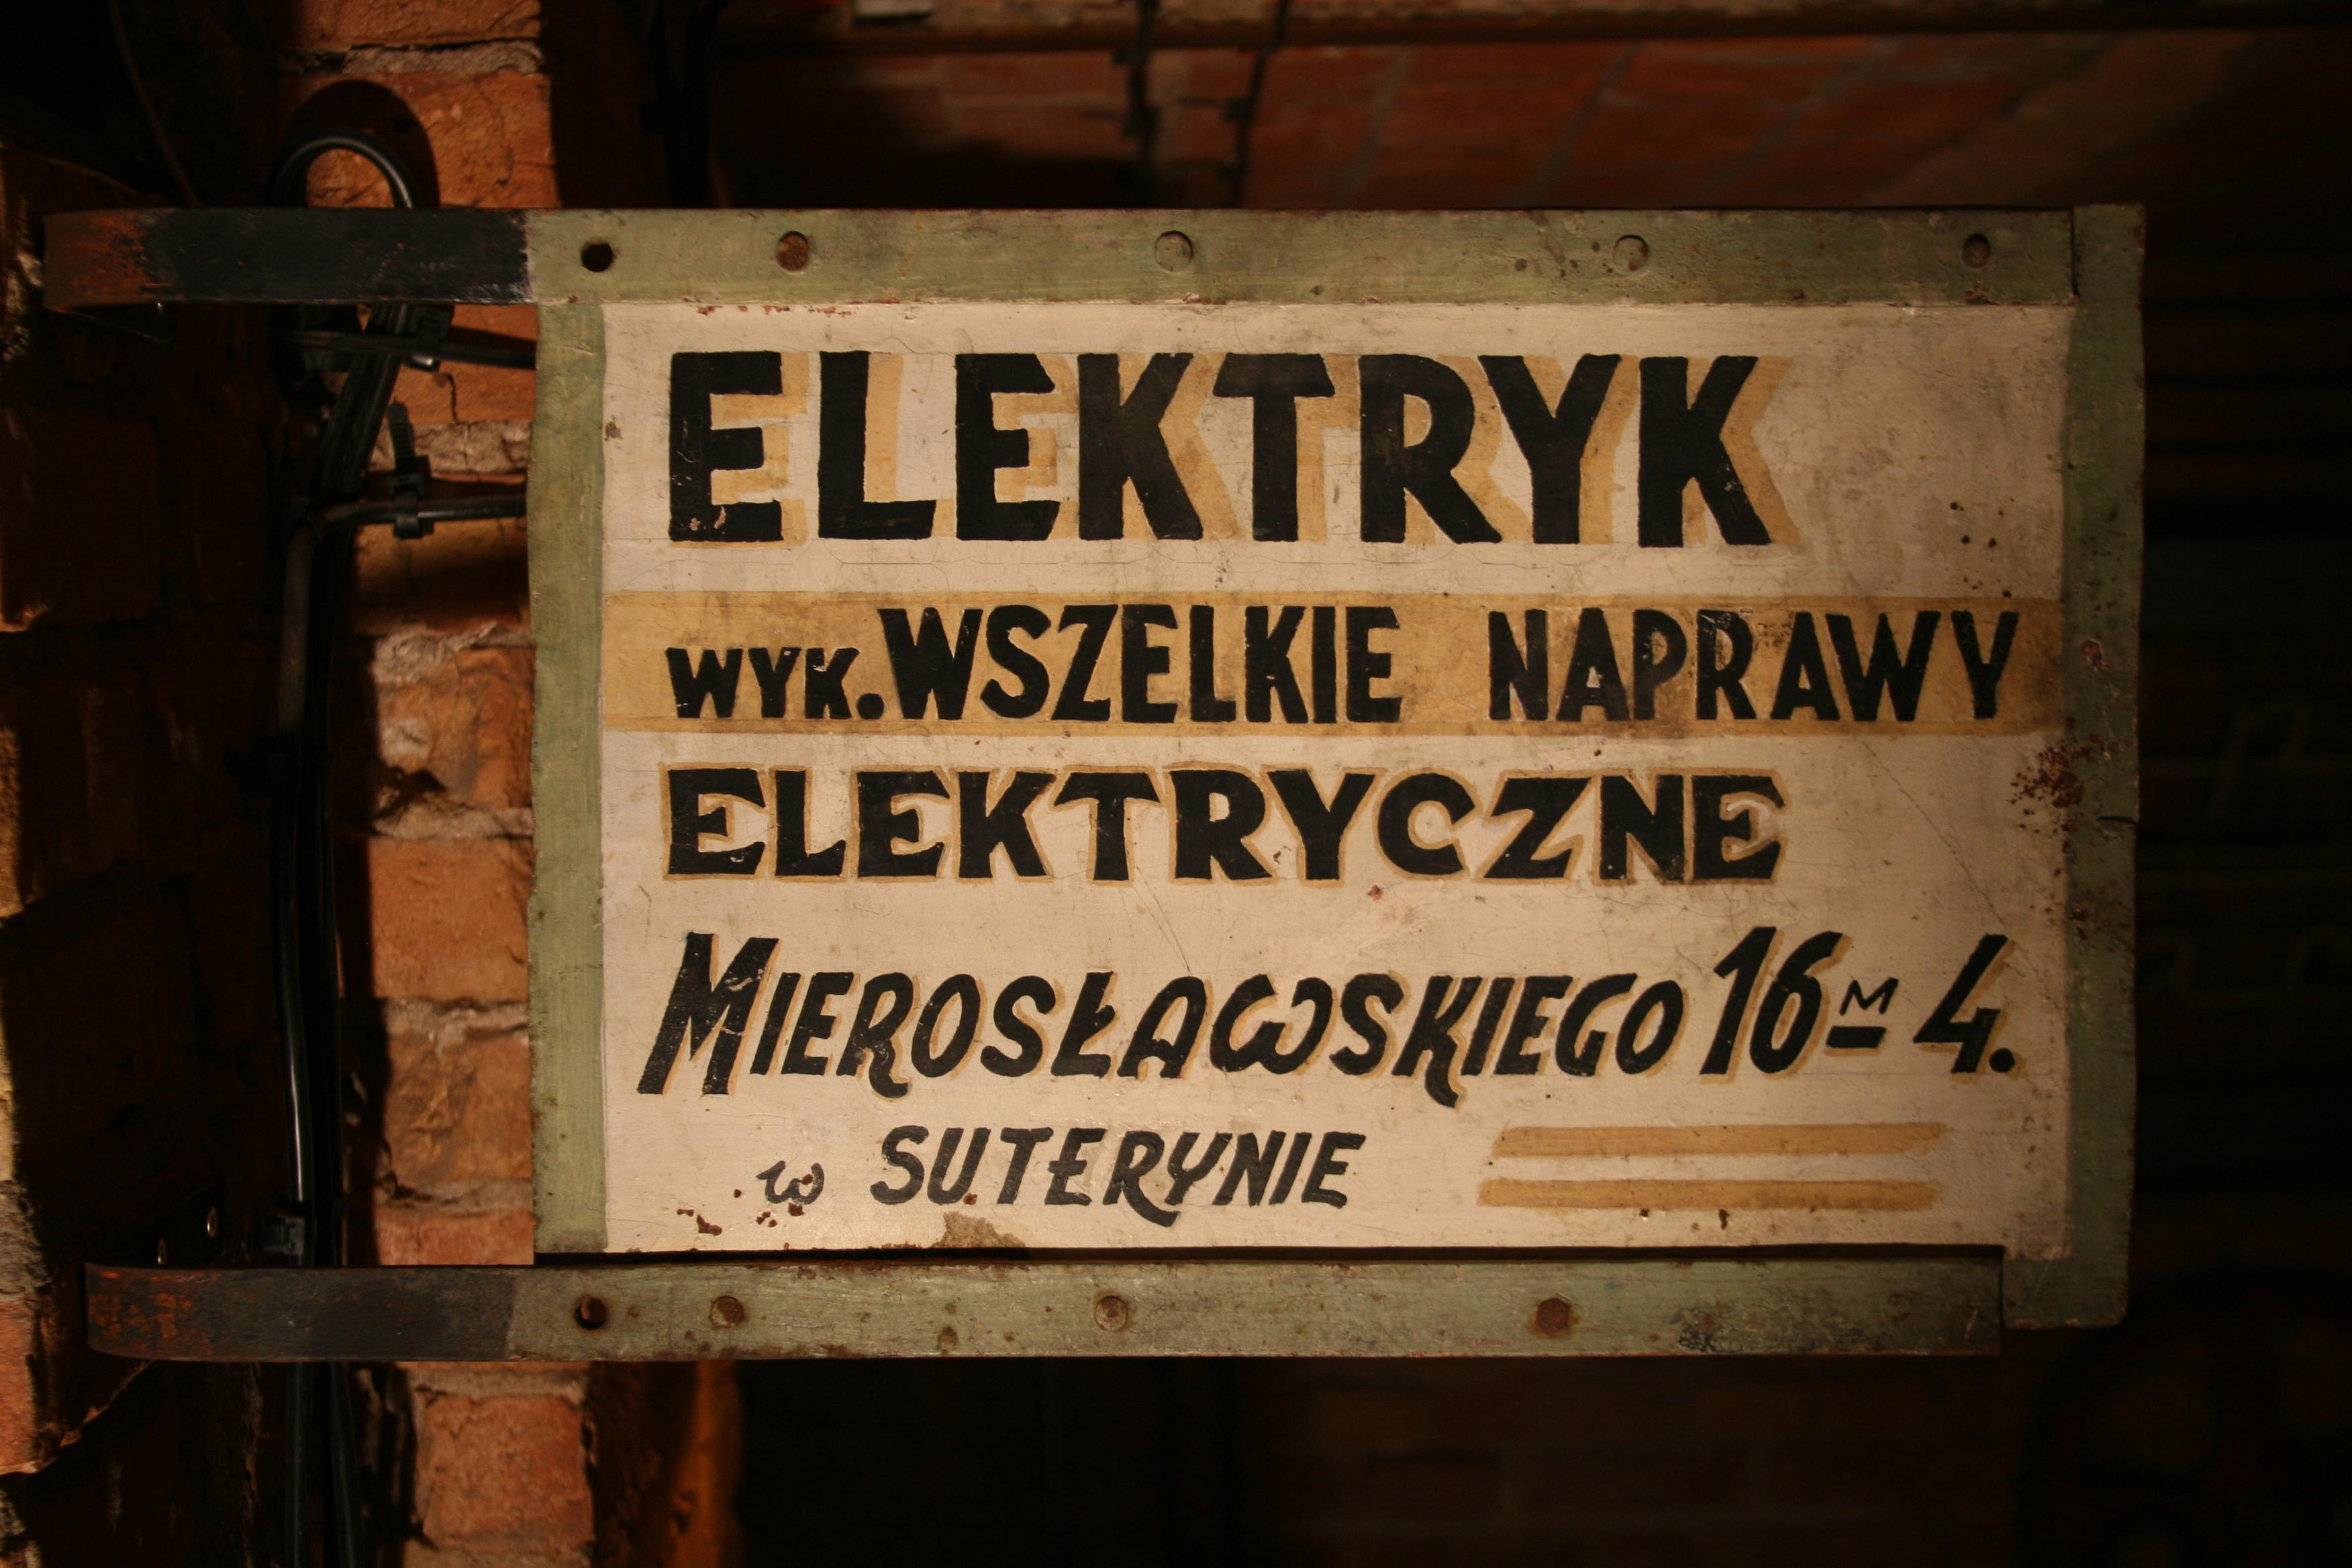 An original polish signboard from the 1950s, advertising a small private repair shop. The signboard comes from Warsaw.

Inscription on the plate:
